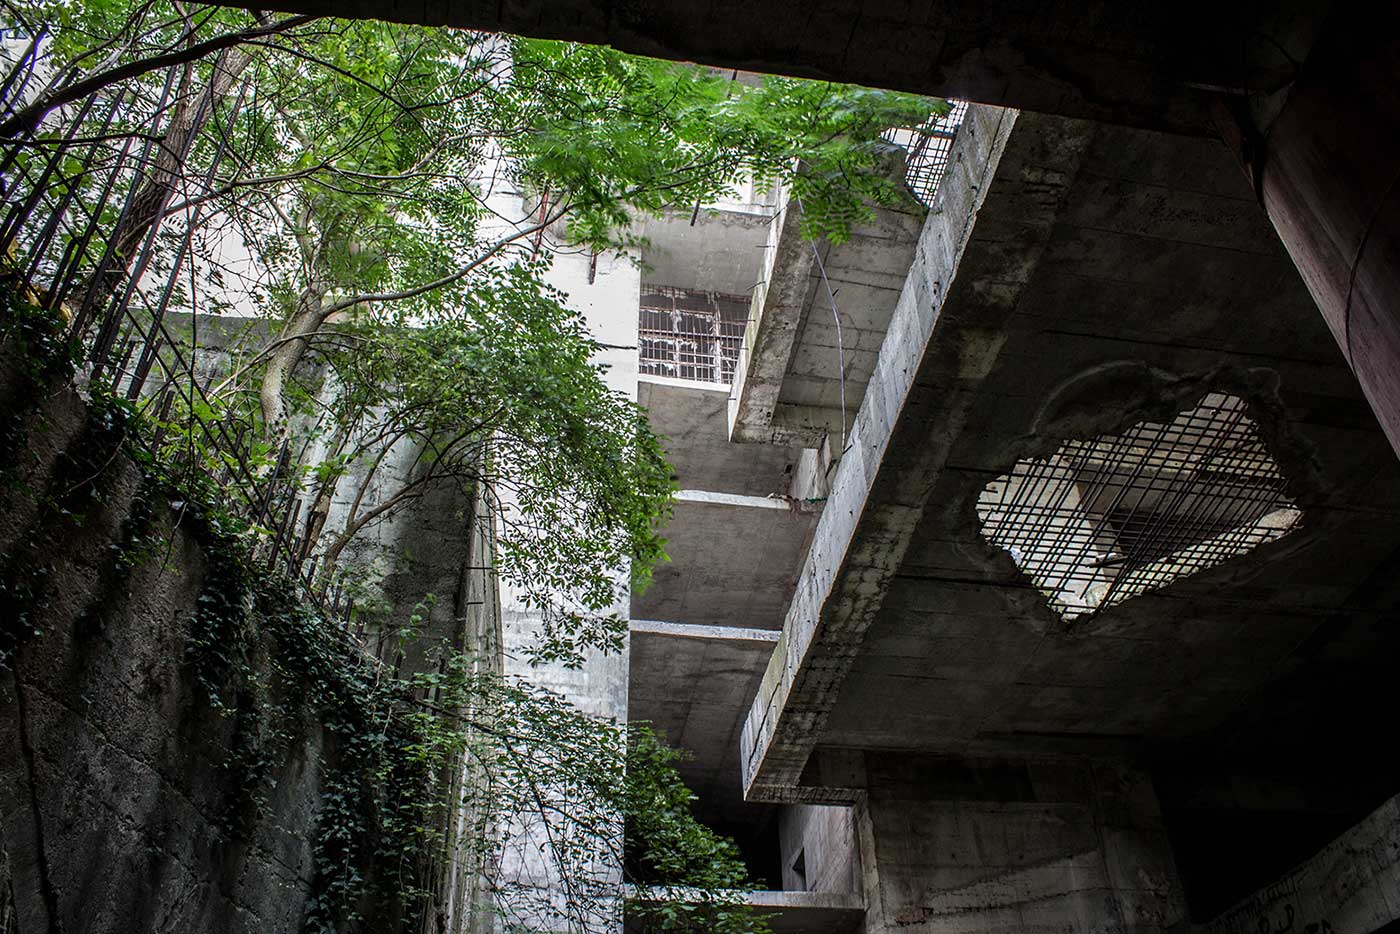 Plants have taken root in some of the airier regions of the complex, such as this open shaft adjacent to the House of Culture. Shumen, Bulgaria.